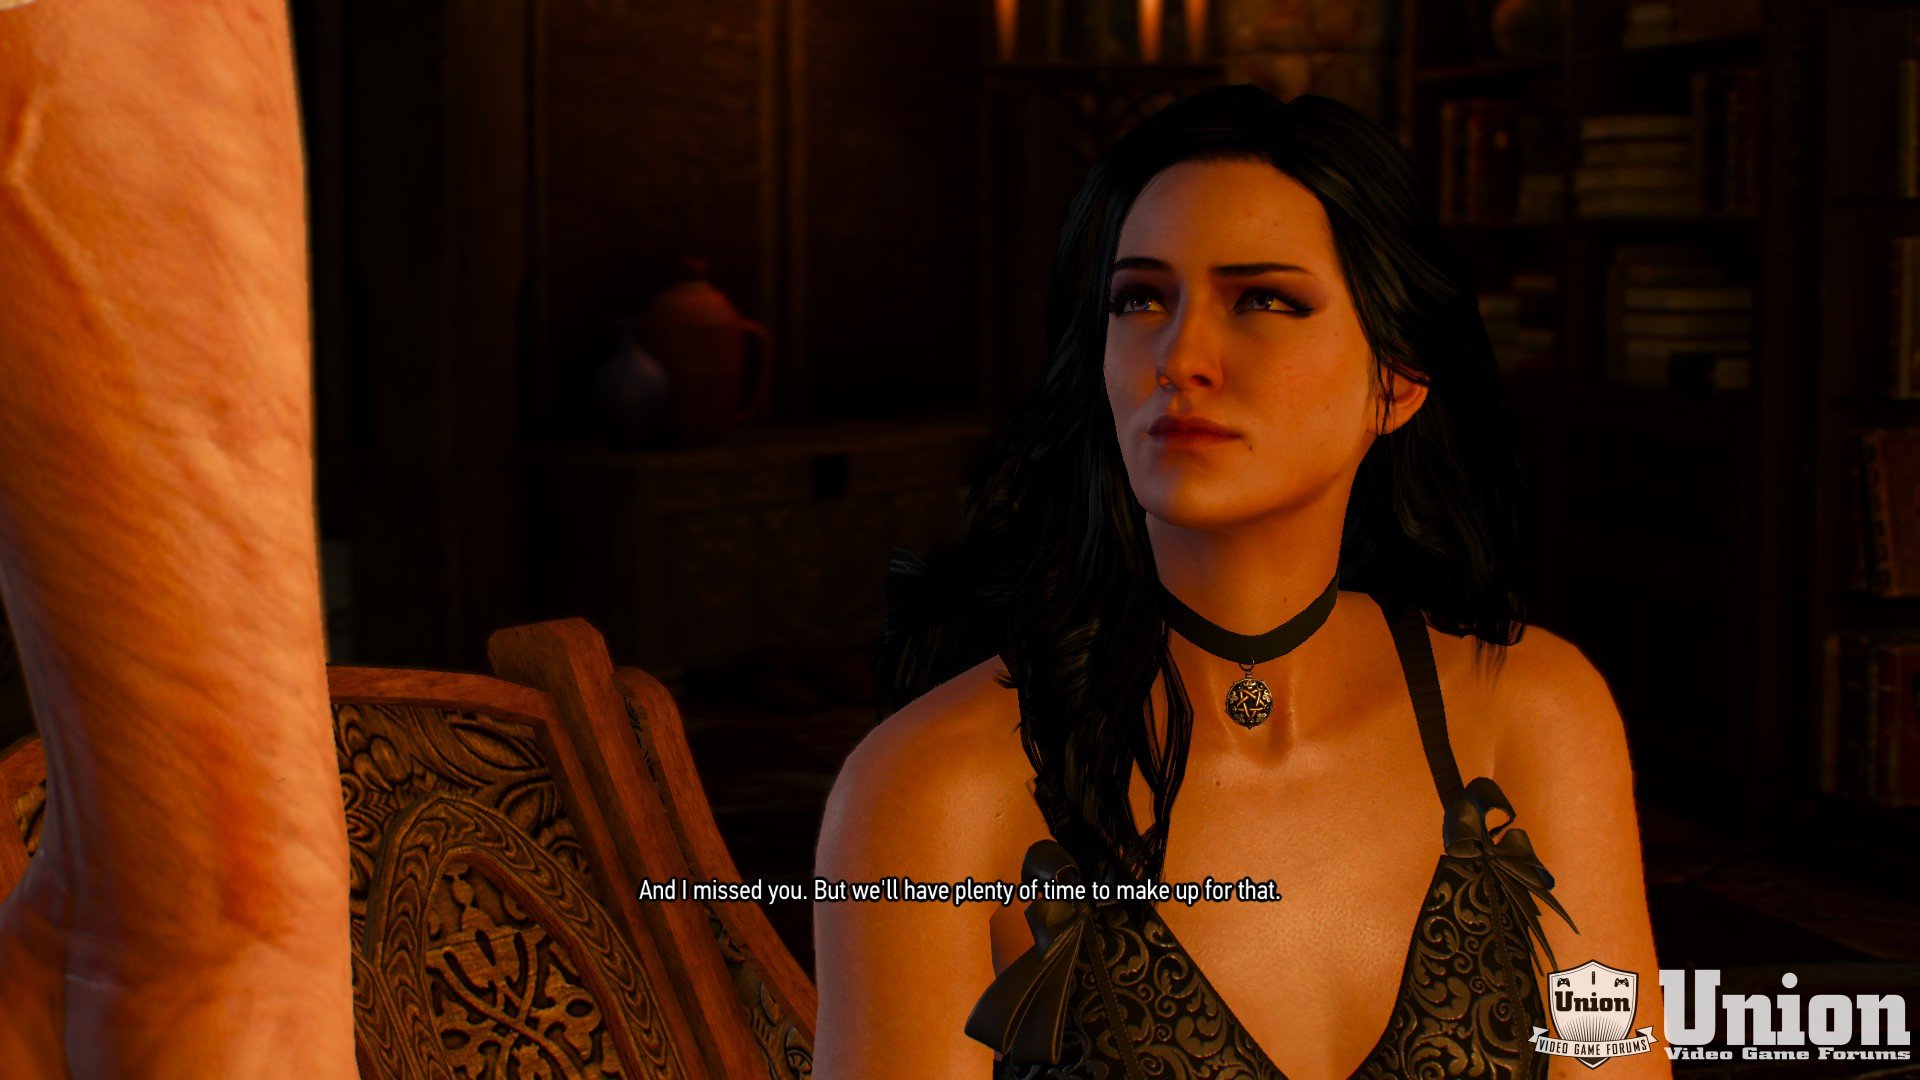 The Witcher 3 01